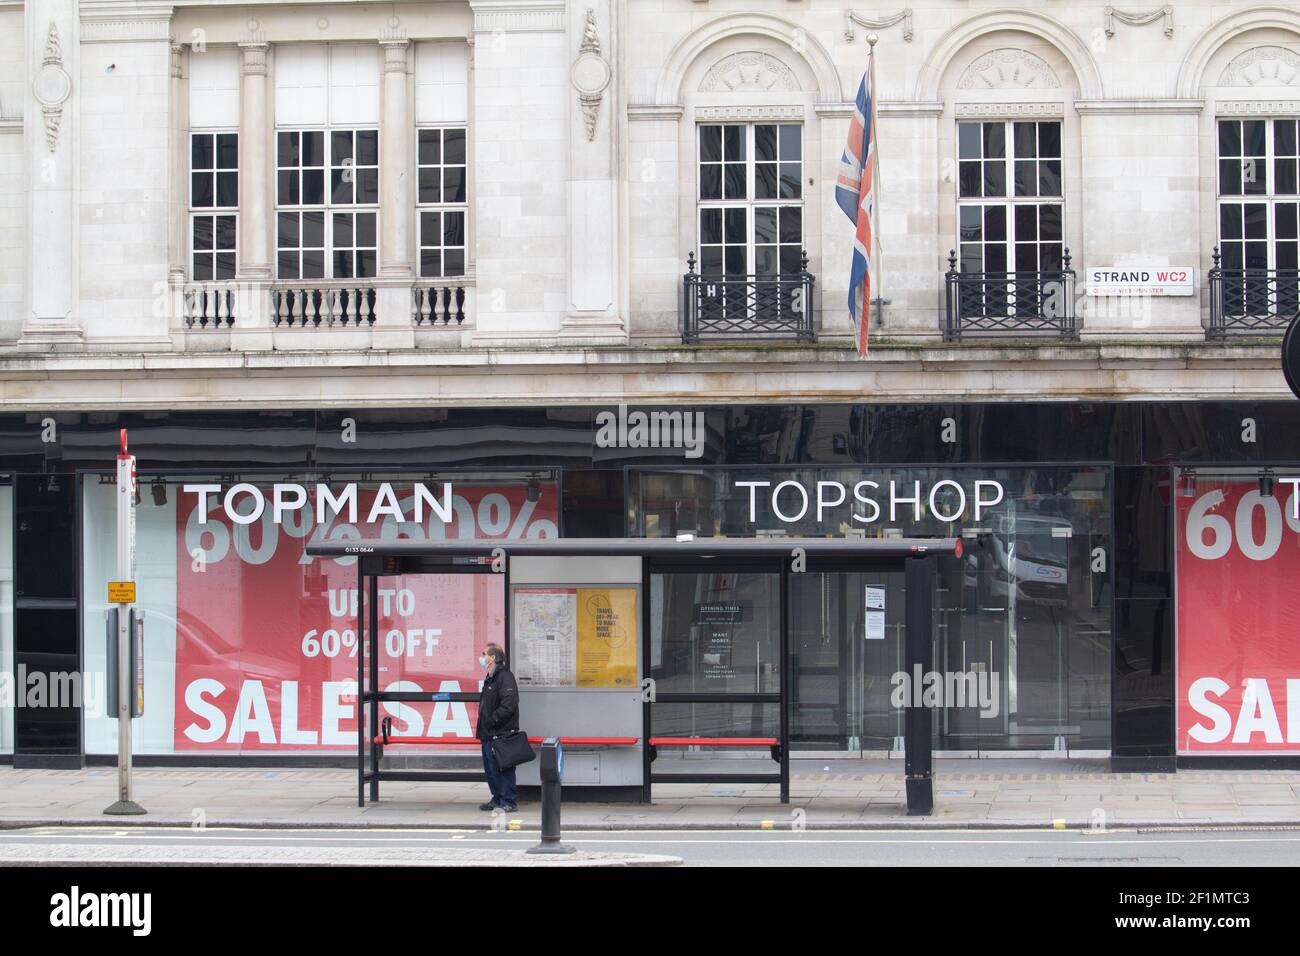 Closed shops in London, Topshop and Topman branch with bus stop in foreground with man wearing PPE mask, Strand, London ex subsidiary of the Arcadia Group went into administration in late 2020. The brand was sold to ASOS  in February 2021 Stock Photo